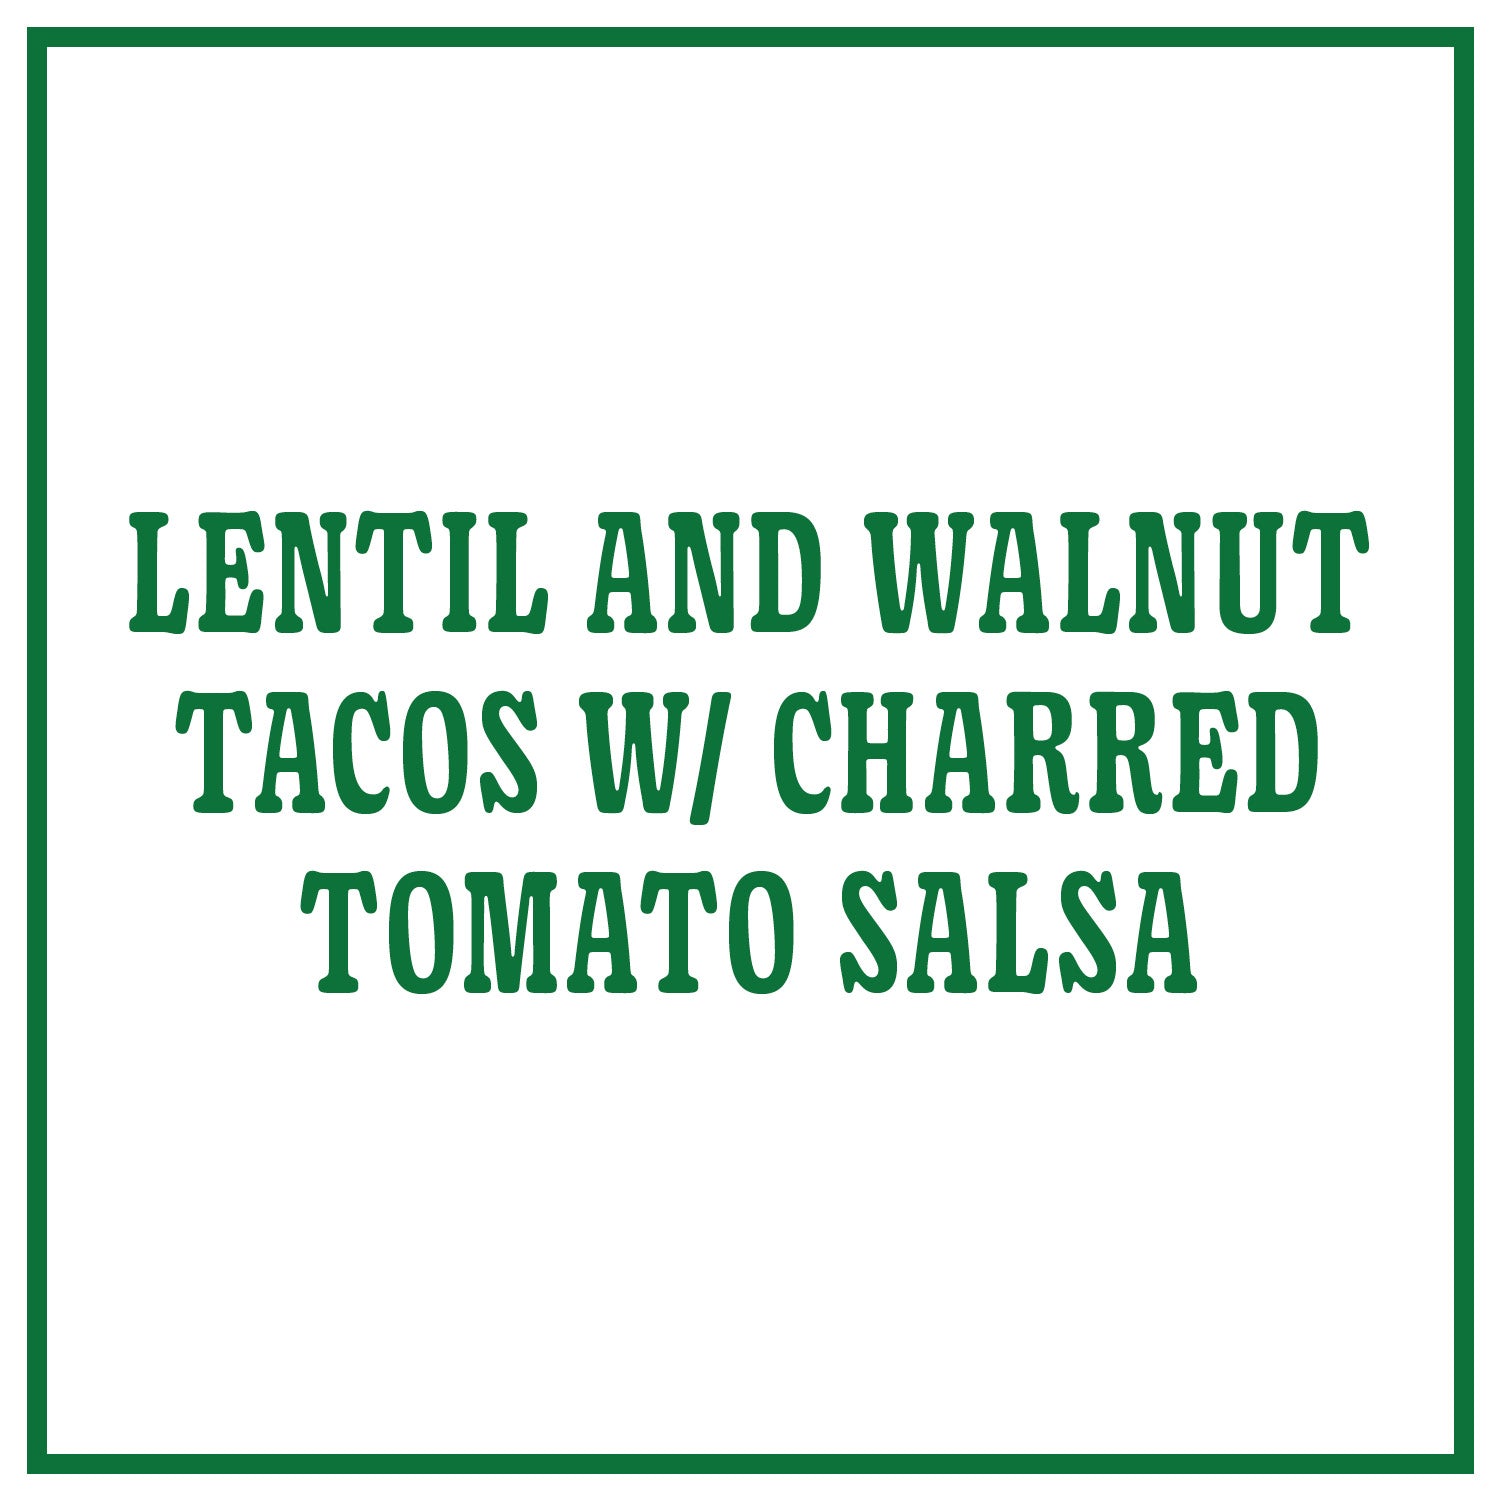 Lentil and Walnut Tacos with Charred Tomato Salsa